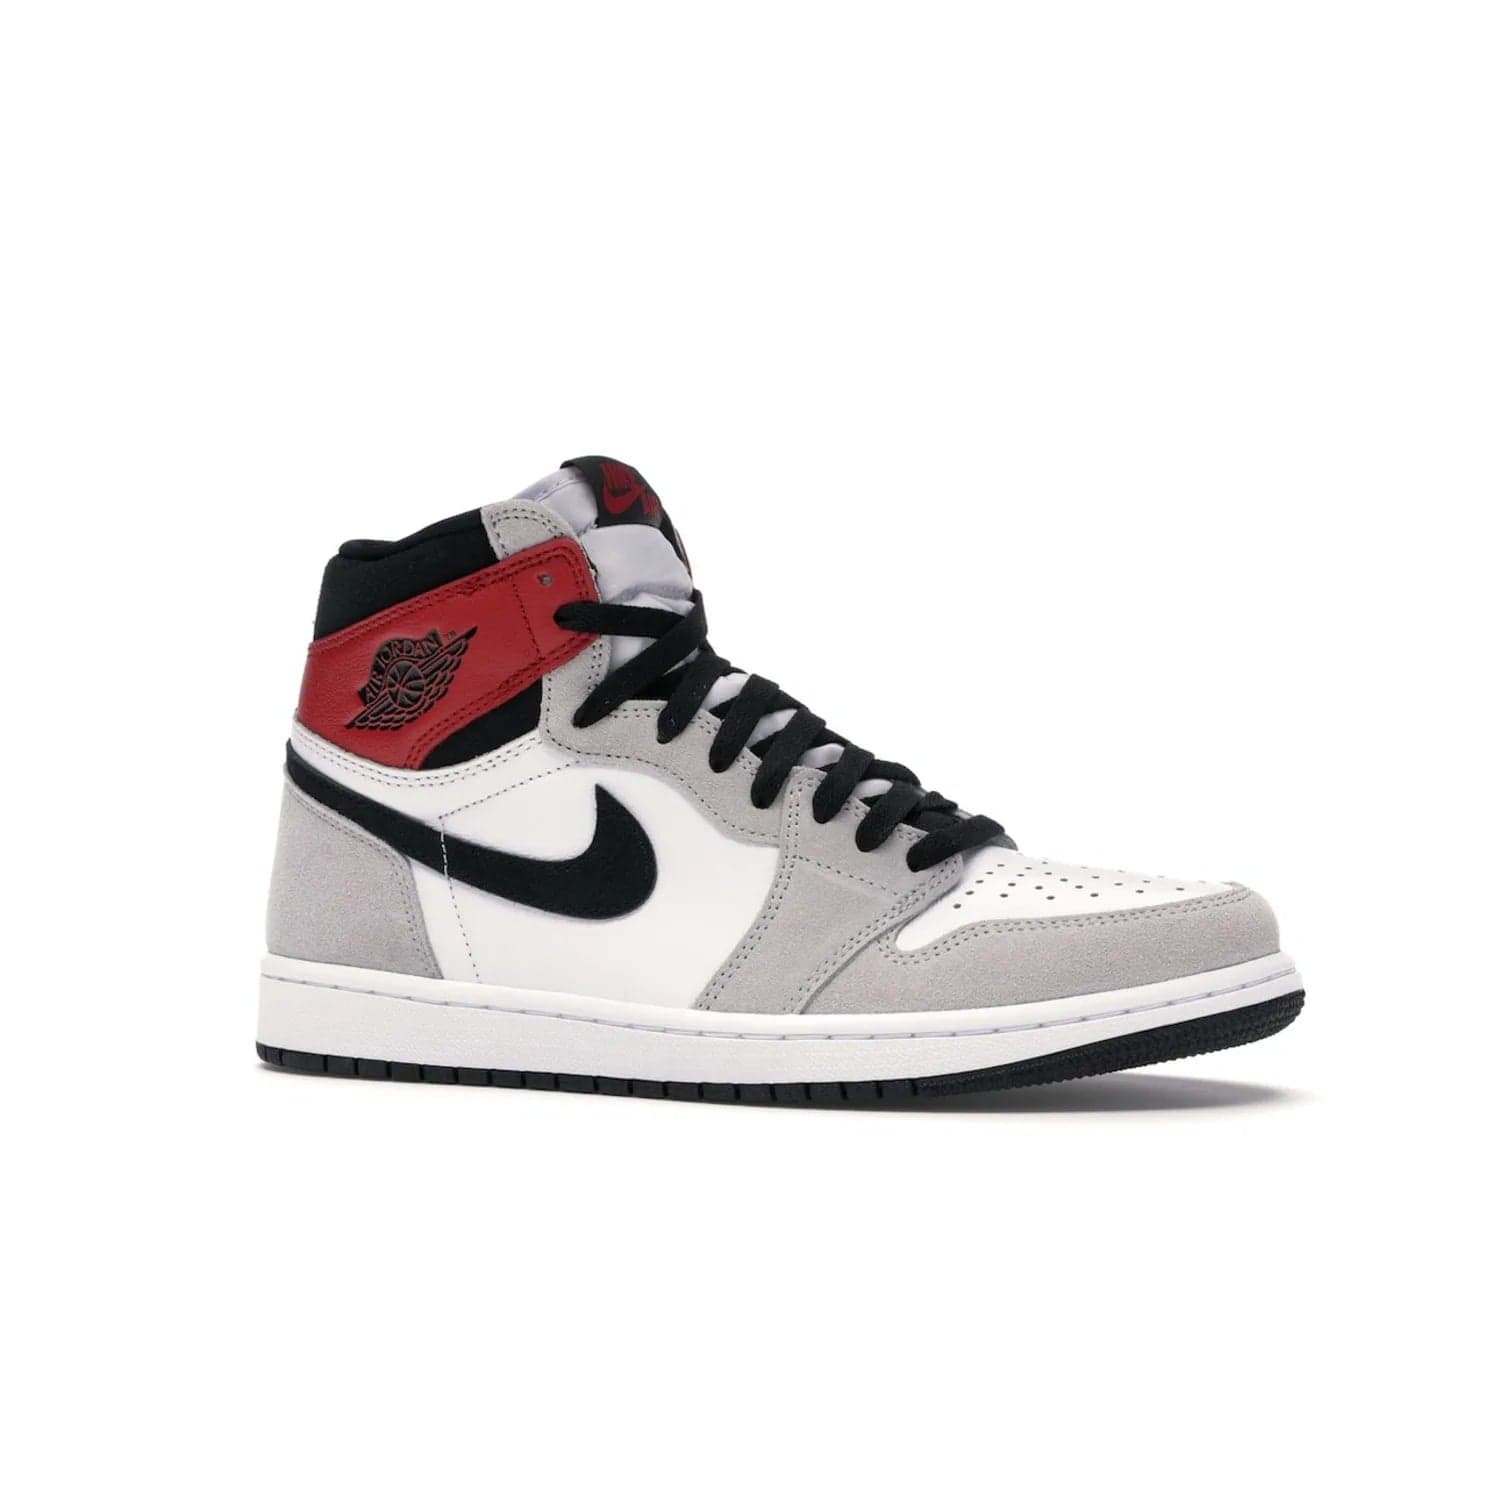 Jordan 1 Retro High Light Smoke Grey - Image 3 - Only at www.BallersClubKickz.com - Comfortable and stylish, Jordan 1 Retro High Light Smoke Grey offers a unique spin on a classic design. White leather, grey suede, red leather and black details are set on a white midsole and black outsole. Get the sneaker released in July 2020 and add a twist to your wardrobe.